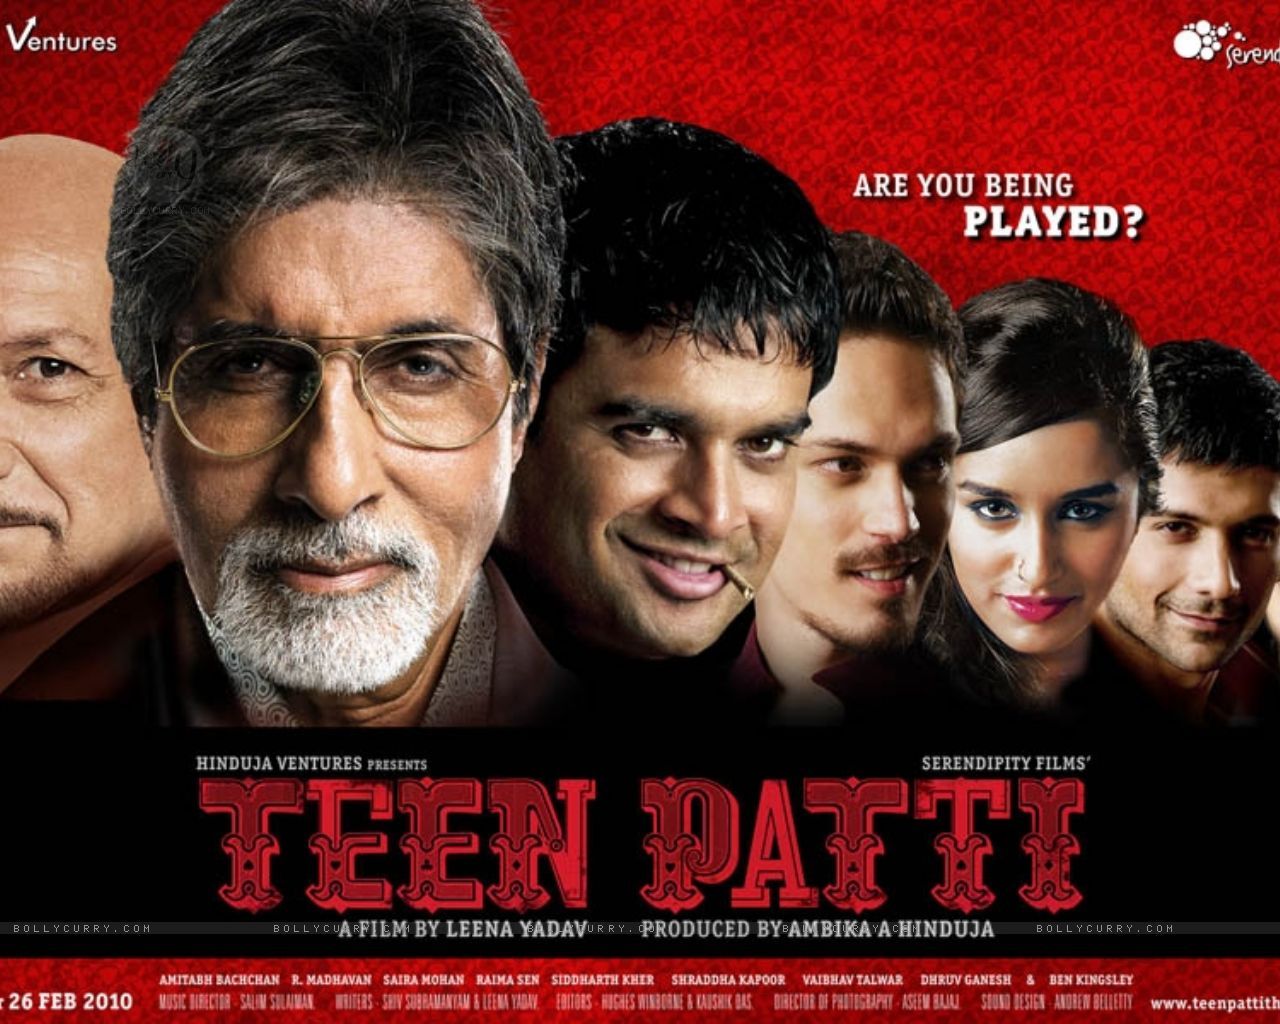 The success of the Teen Patti film has boosted the popularity of the game in India. Learn about the Teen Patti brand here.